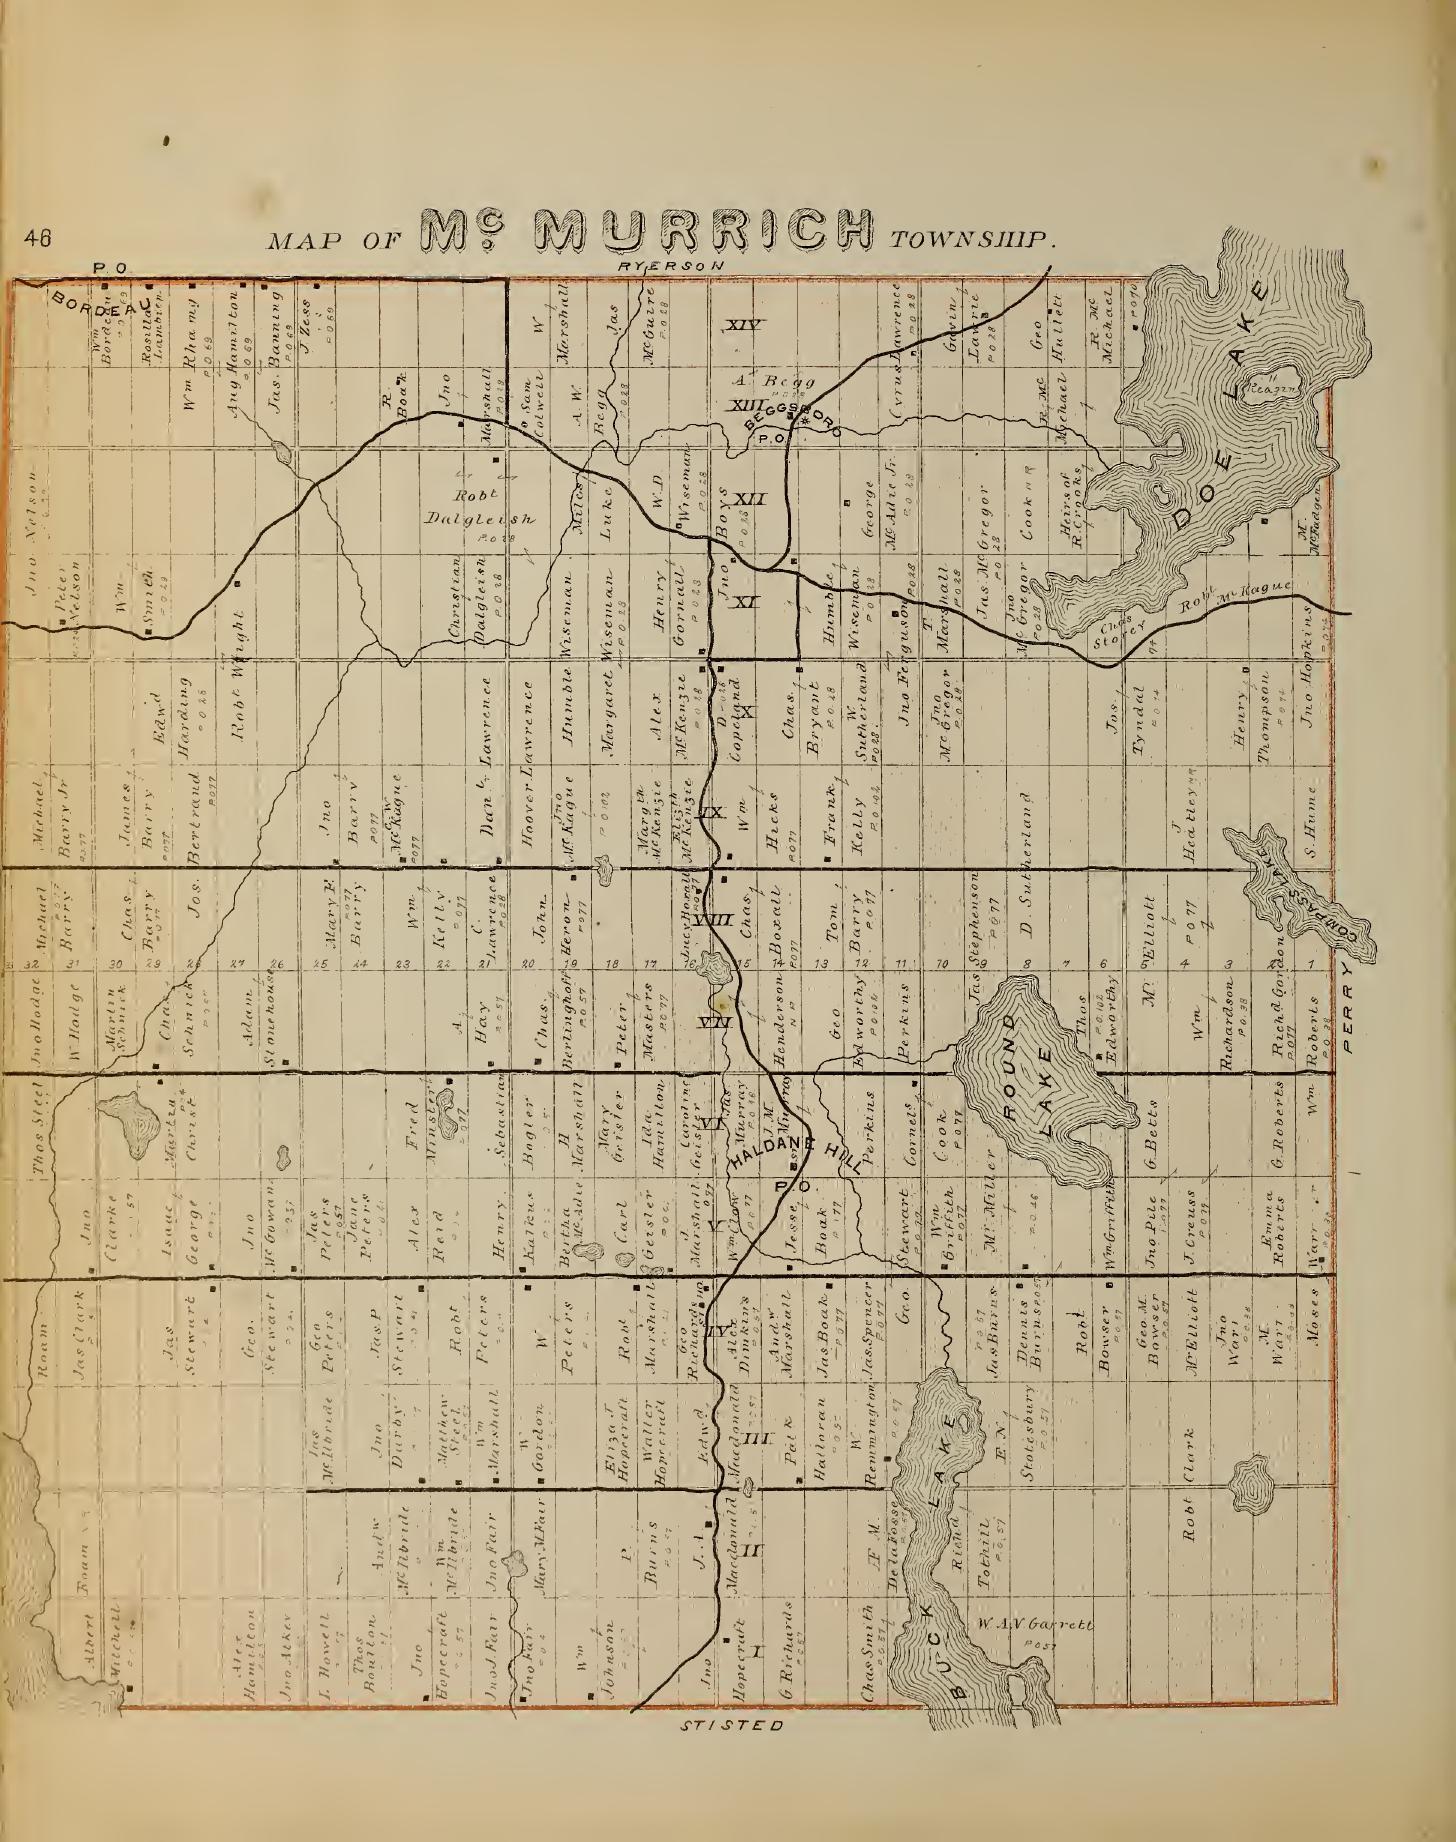 Historical map showing Concessions and Lots for mcmurrich